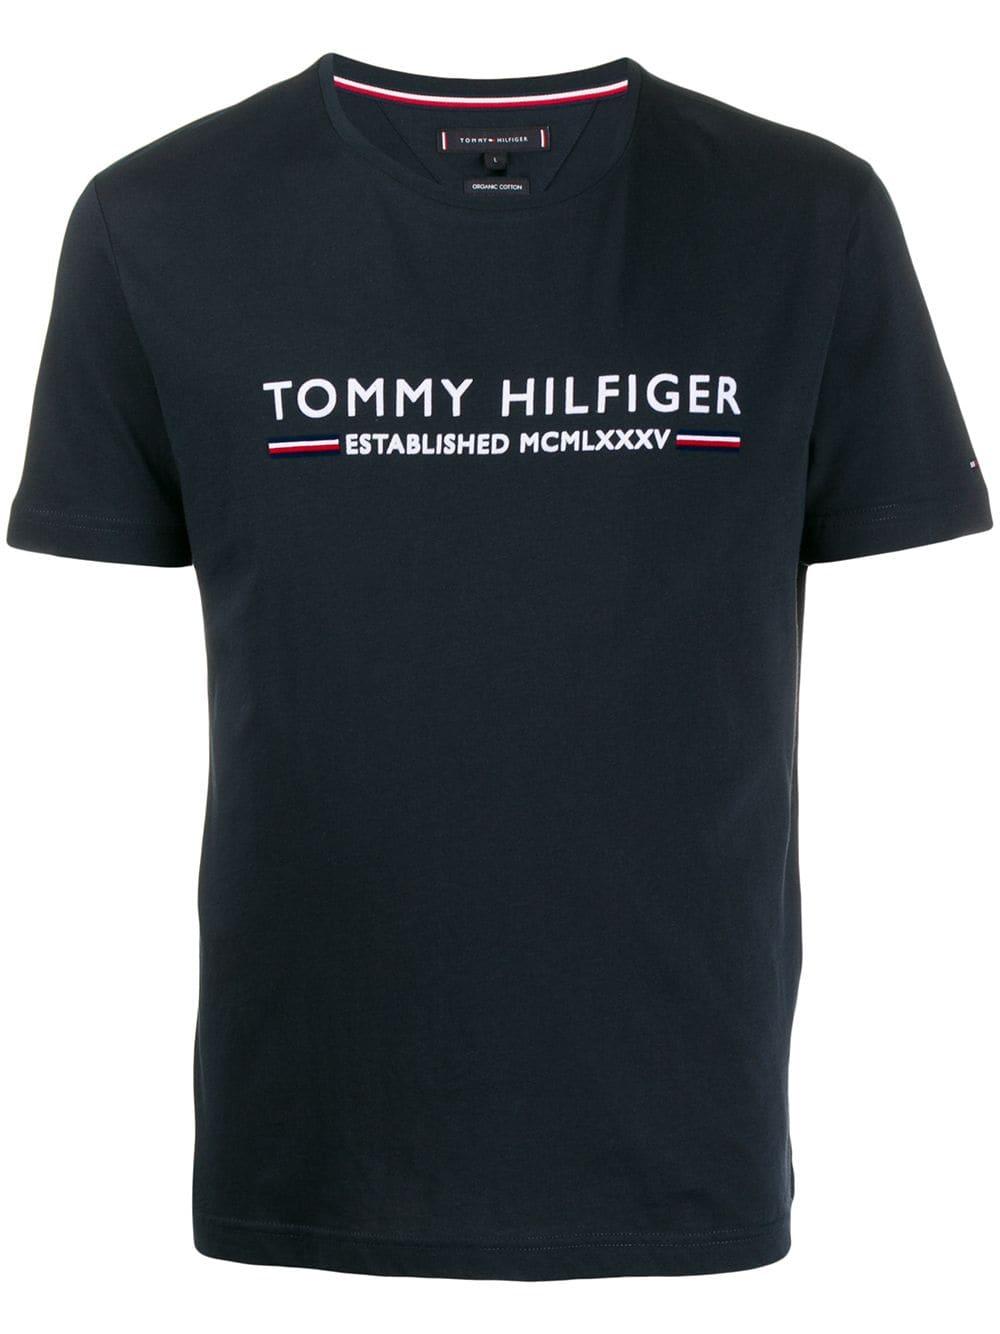 Tommy Hilfiger Cotton Mcmlxxxv T-shirt in Blue for Men - Lyst